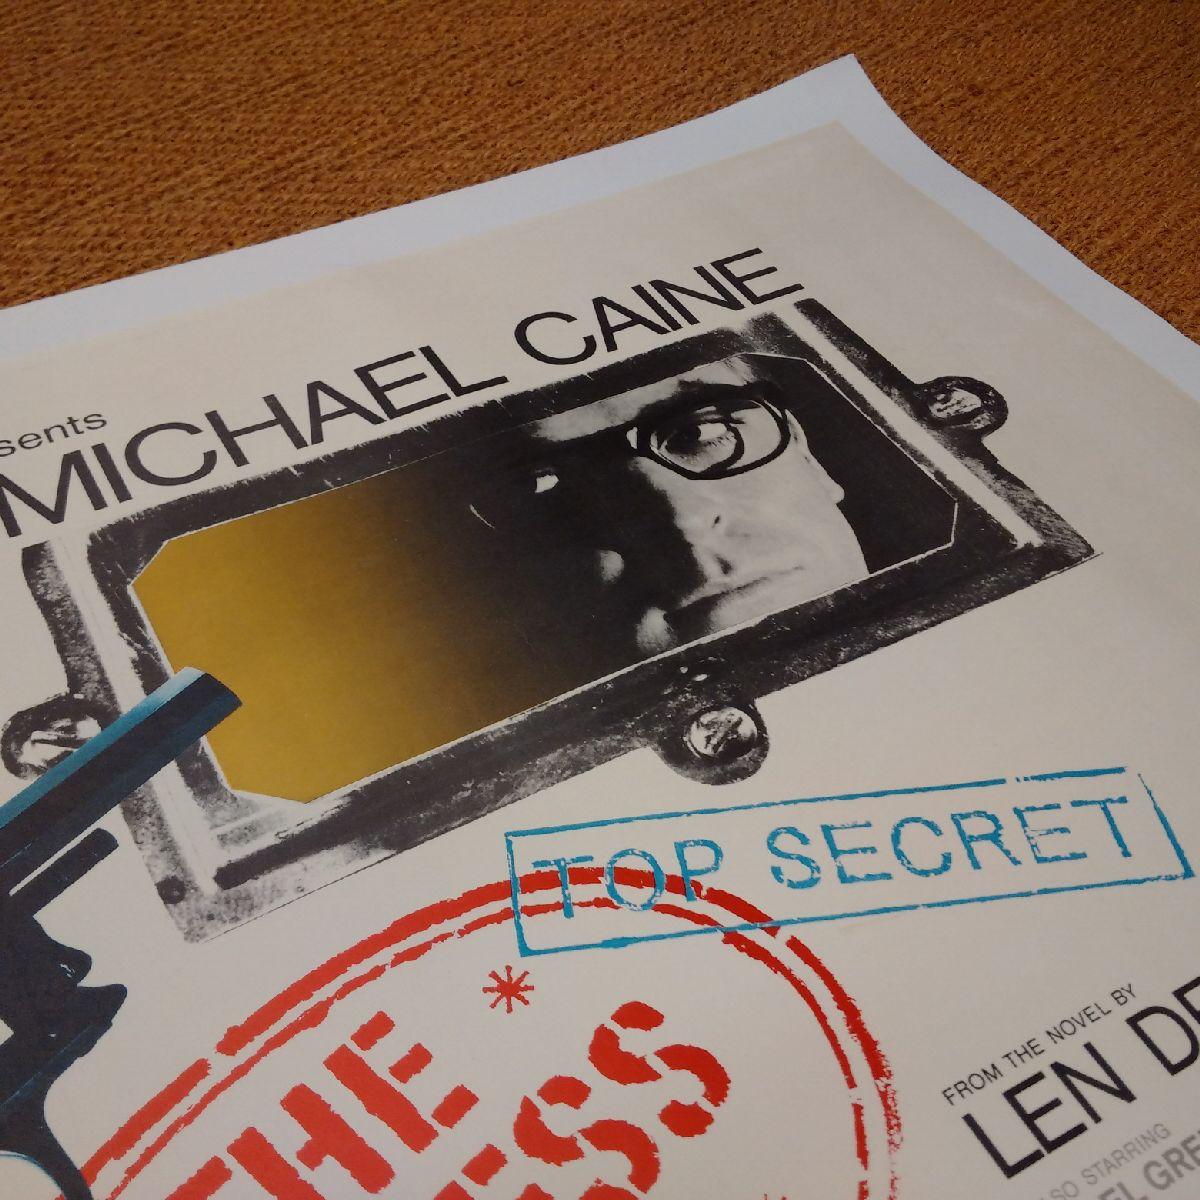 Other Original Film Poster for 'The Ipcress File' Starring Michael Caine, Dated 1965